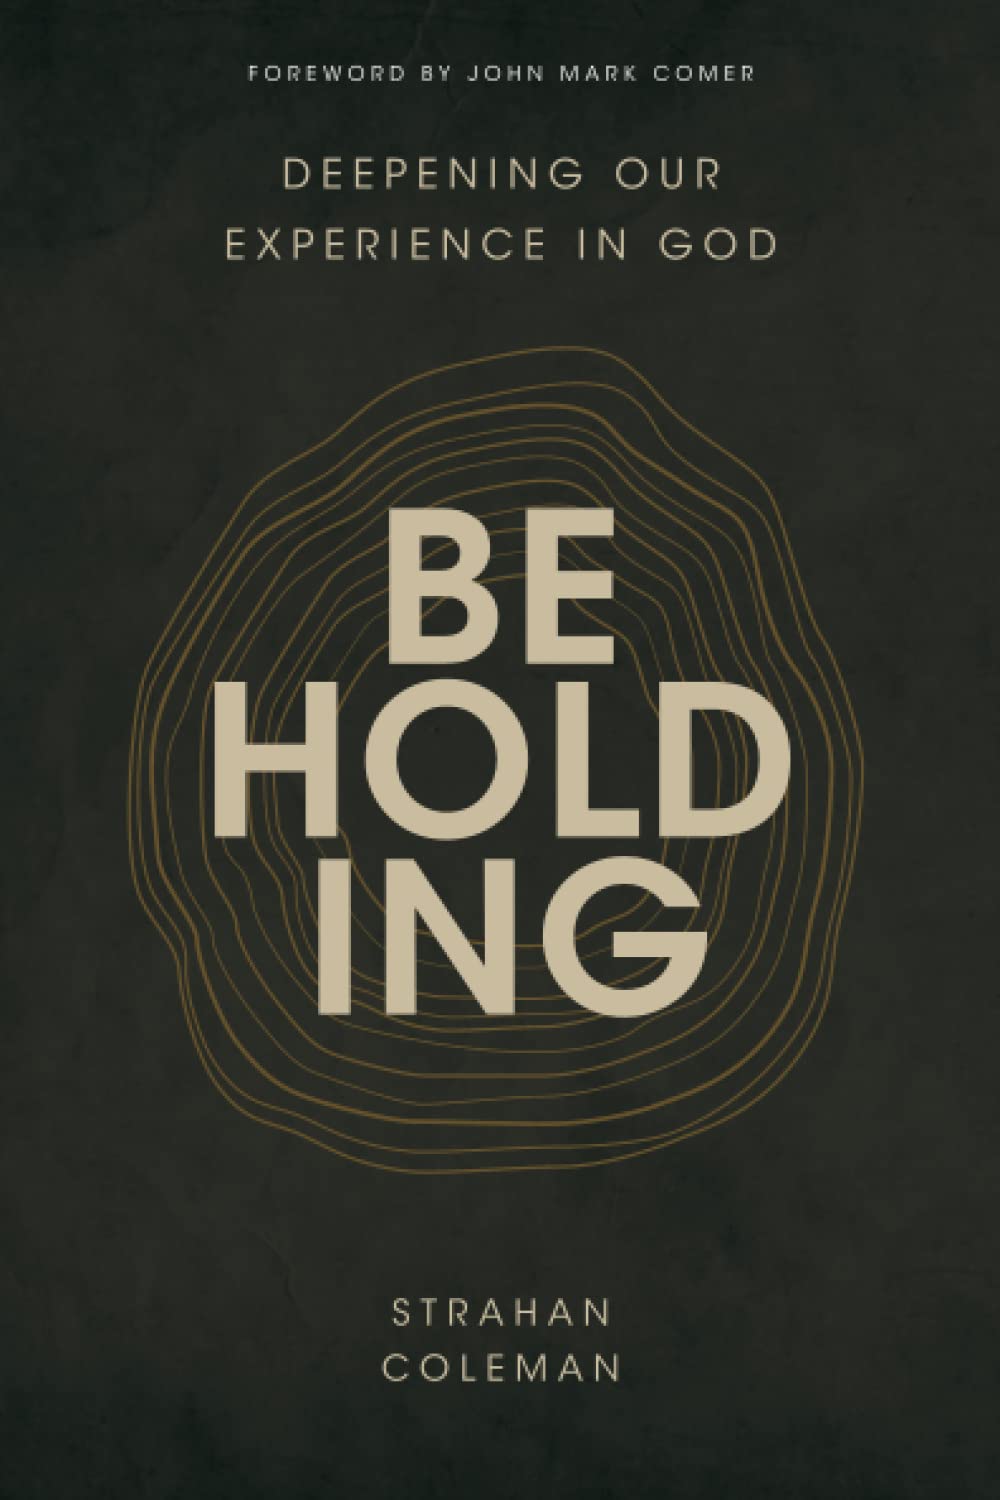 Beholding: Prayer Recommended Book